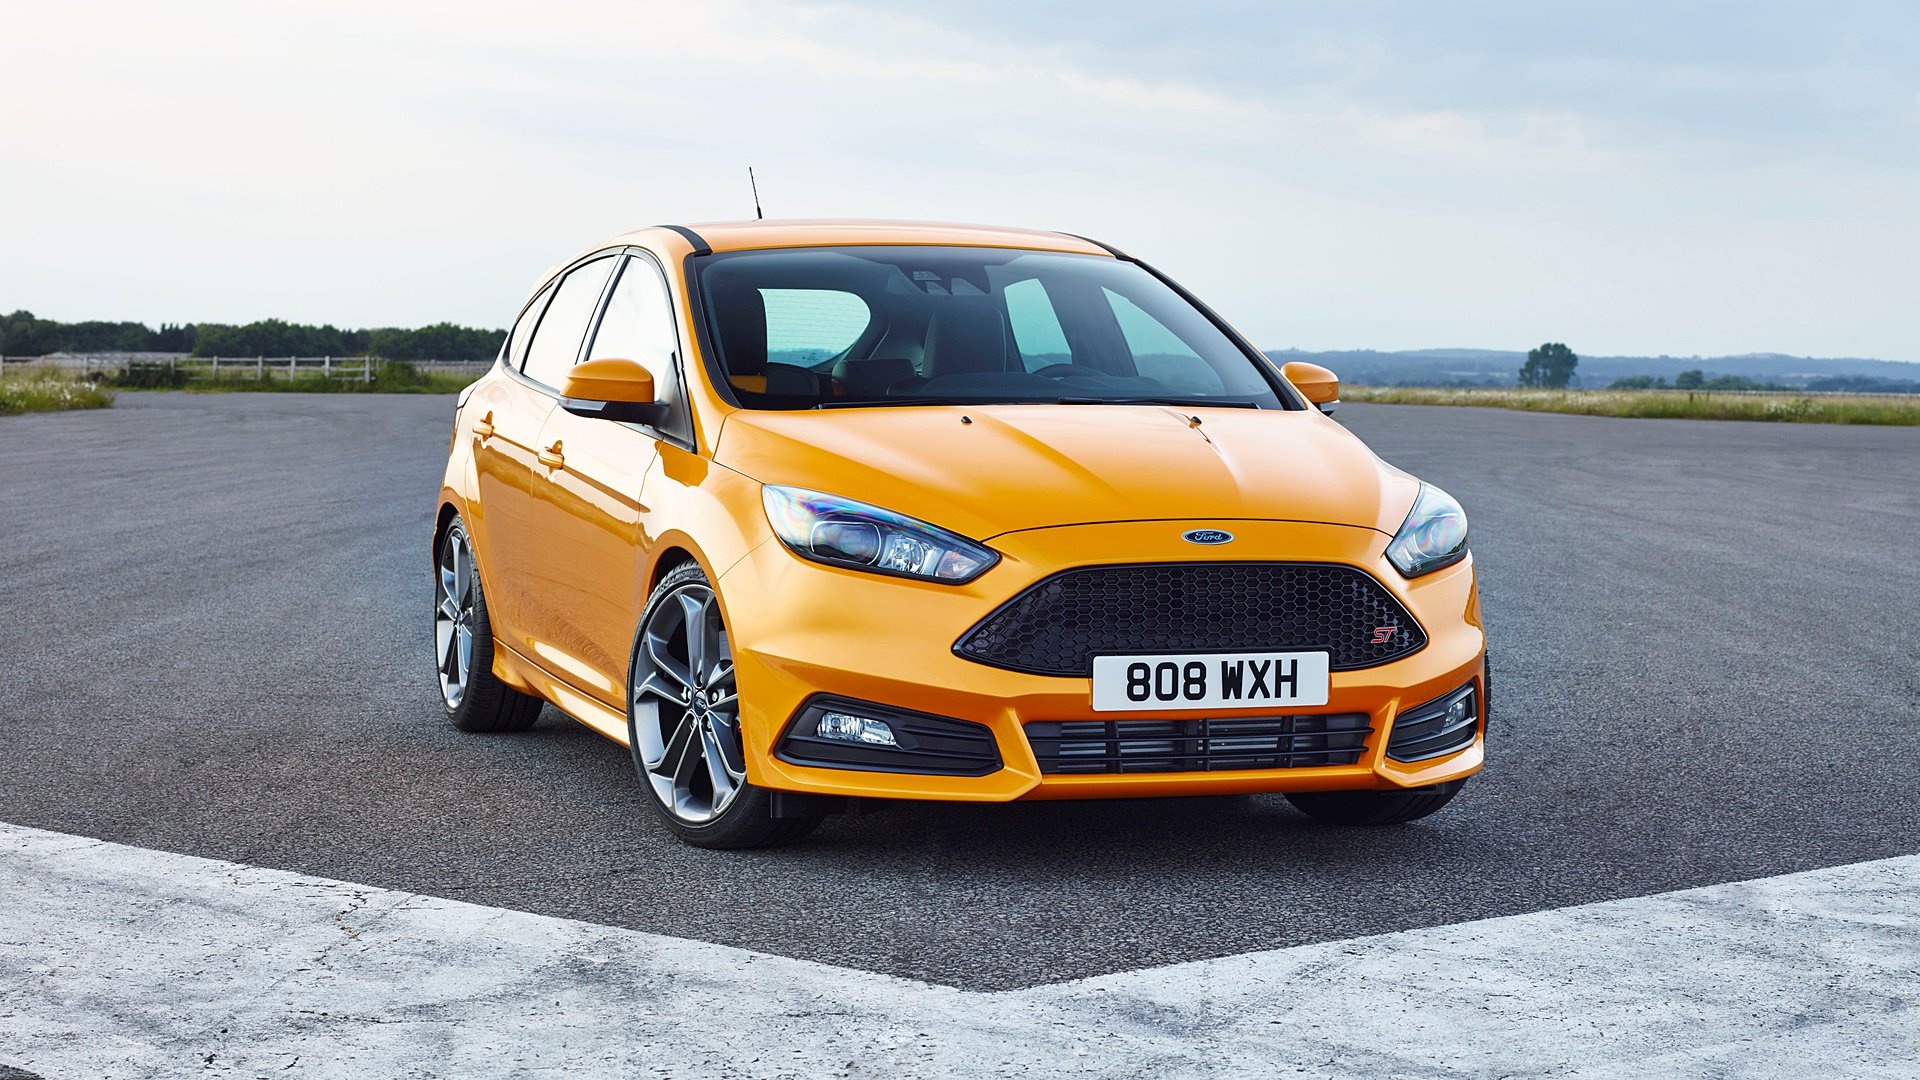 Ford Focus: The Mk III facelifted model was previewed at the 2014 Geneva Motor Show. 1920x1080 Full HD Background.